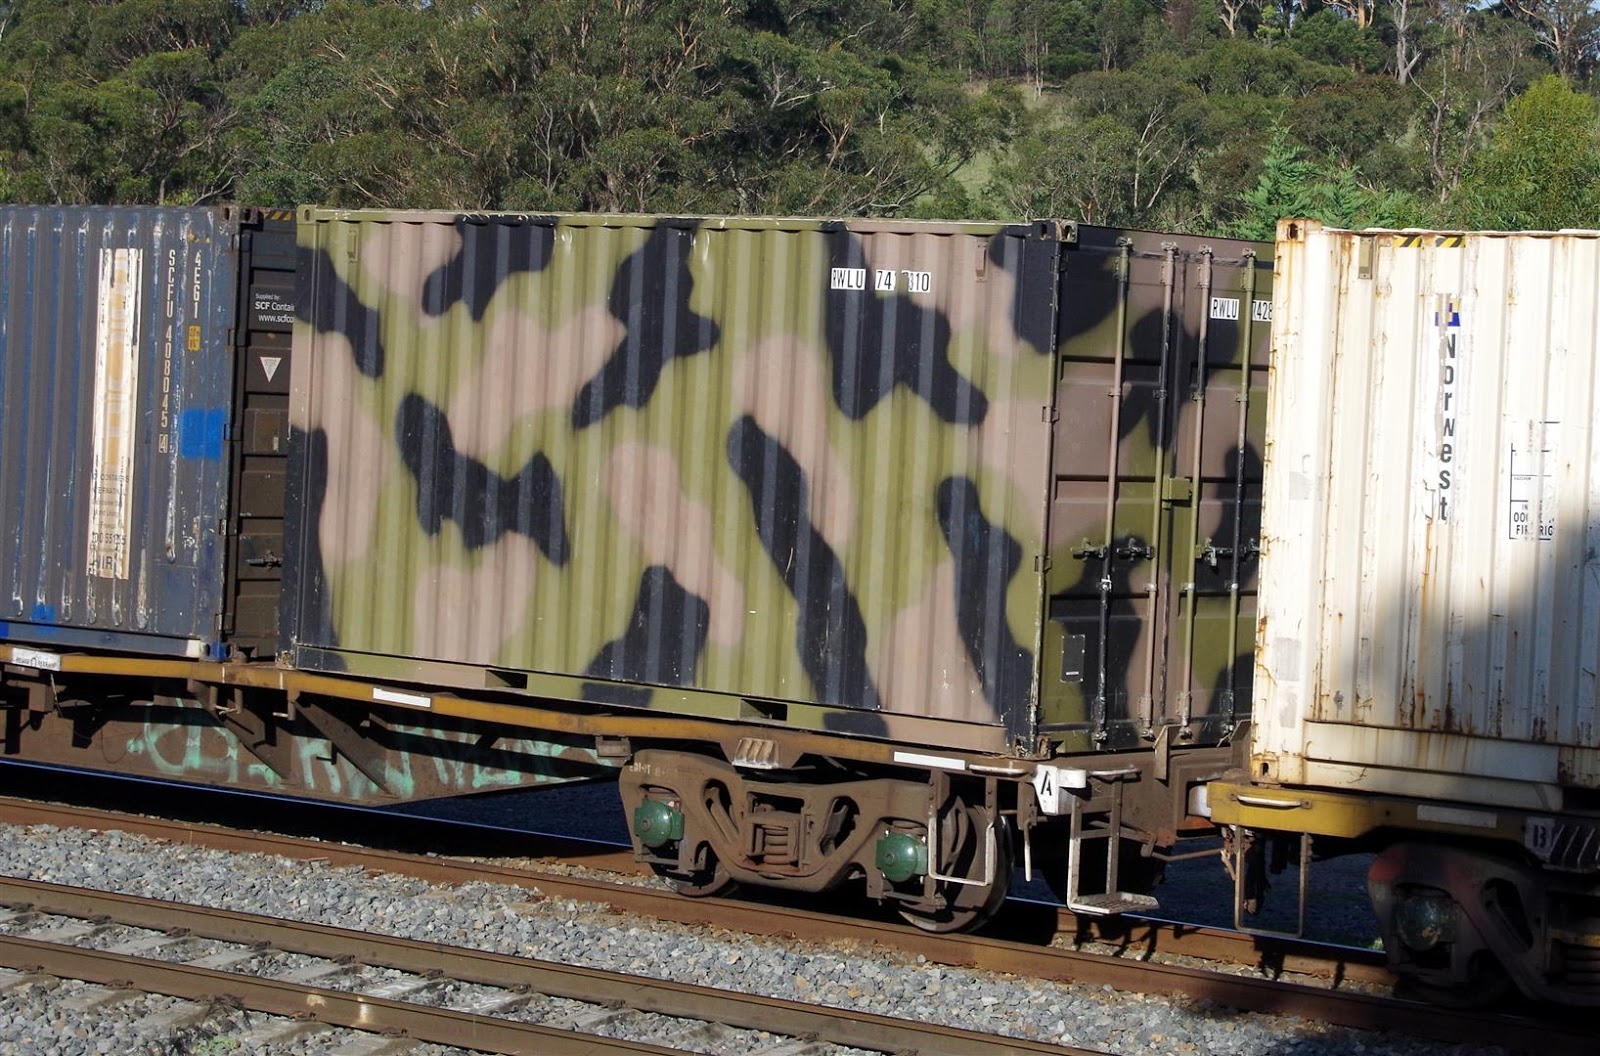 Rollingstock News: Camo Containers